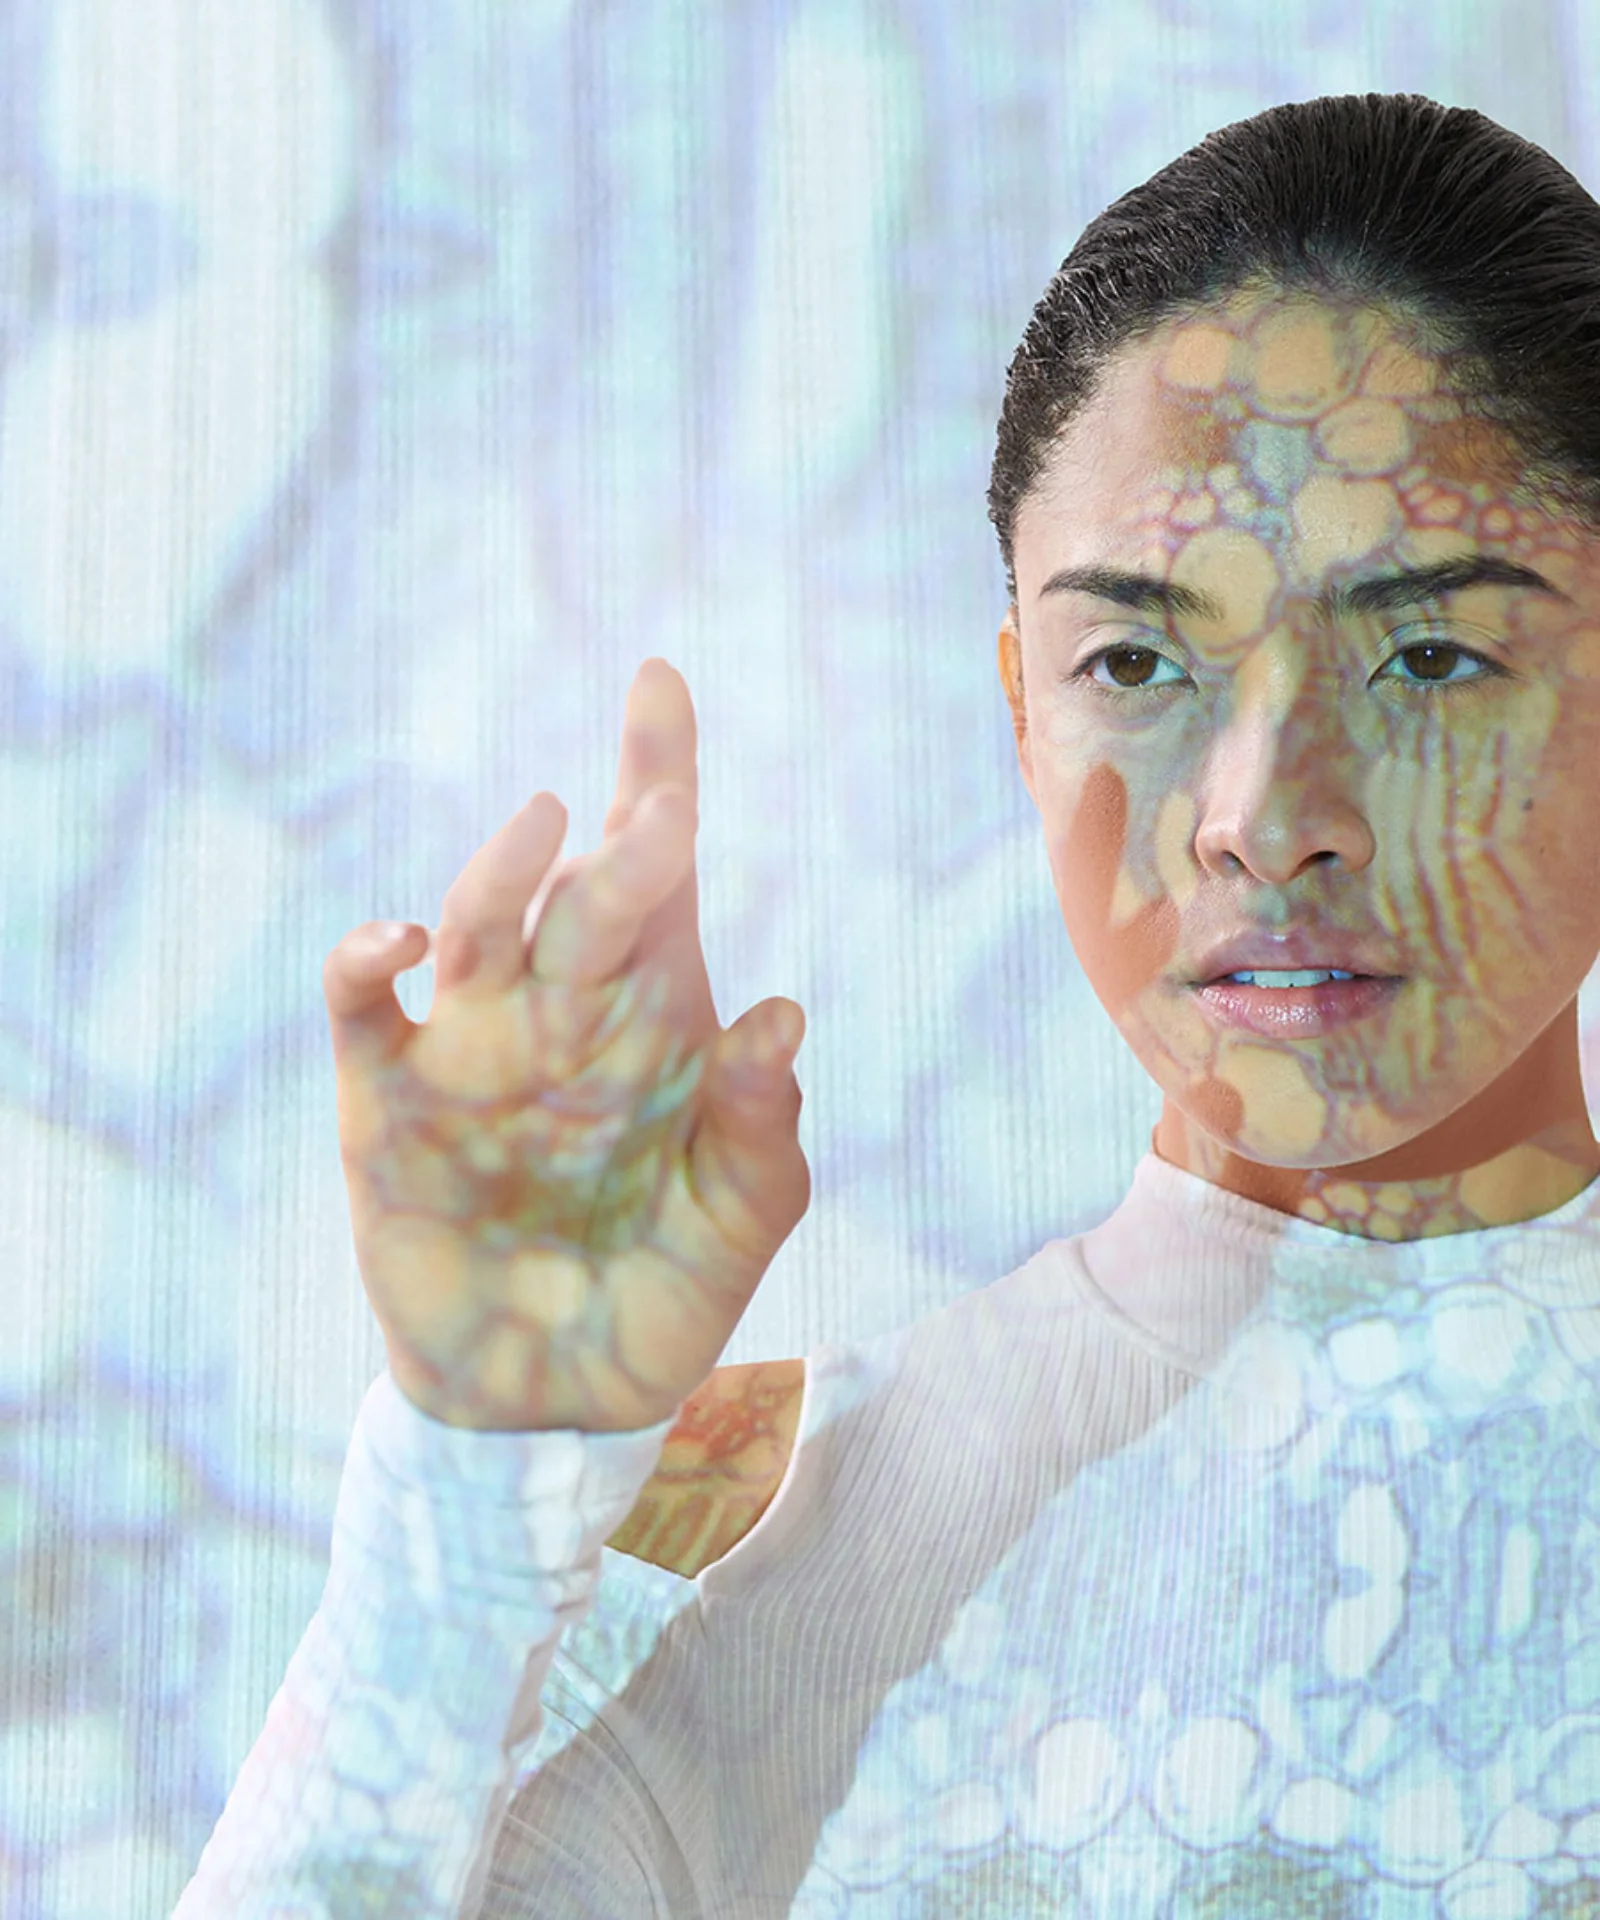 This key visual showcases a woman with digital patterns projected onto her face and body, symbolizing the integration of artificial intelligence and human interaction. The image represents the cutting-edge advancements in AI technology and its seamless blending with human capabilities.